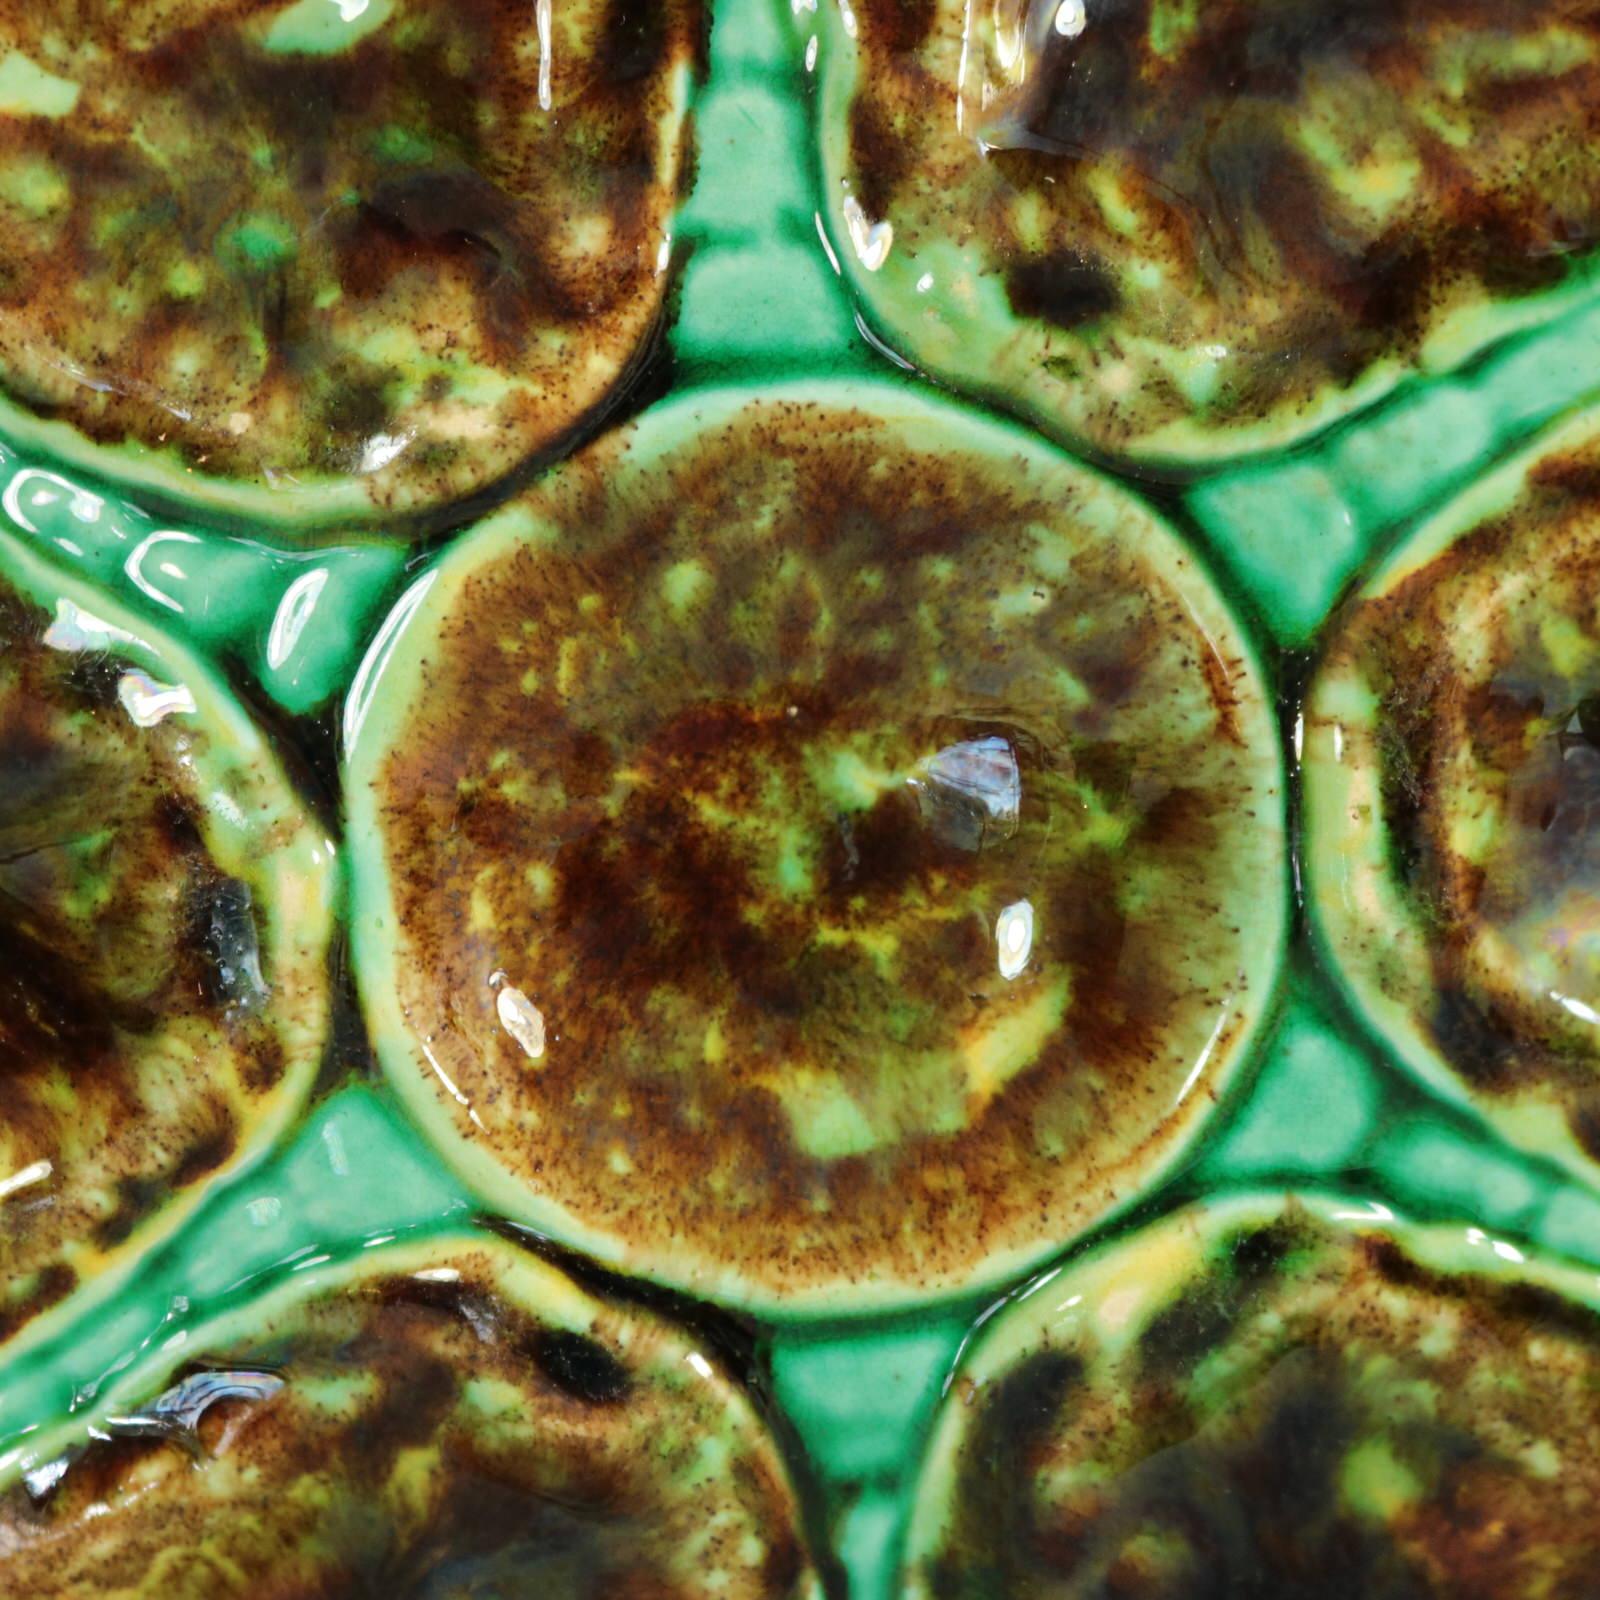 Unidentified English or European Majolica oyster plate which features six shell-shaped wells surrounding a circular central well. Colouration: green, brown, yellow, are predominant. Bears a pattern number, '::'.